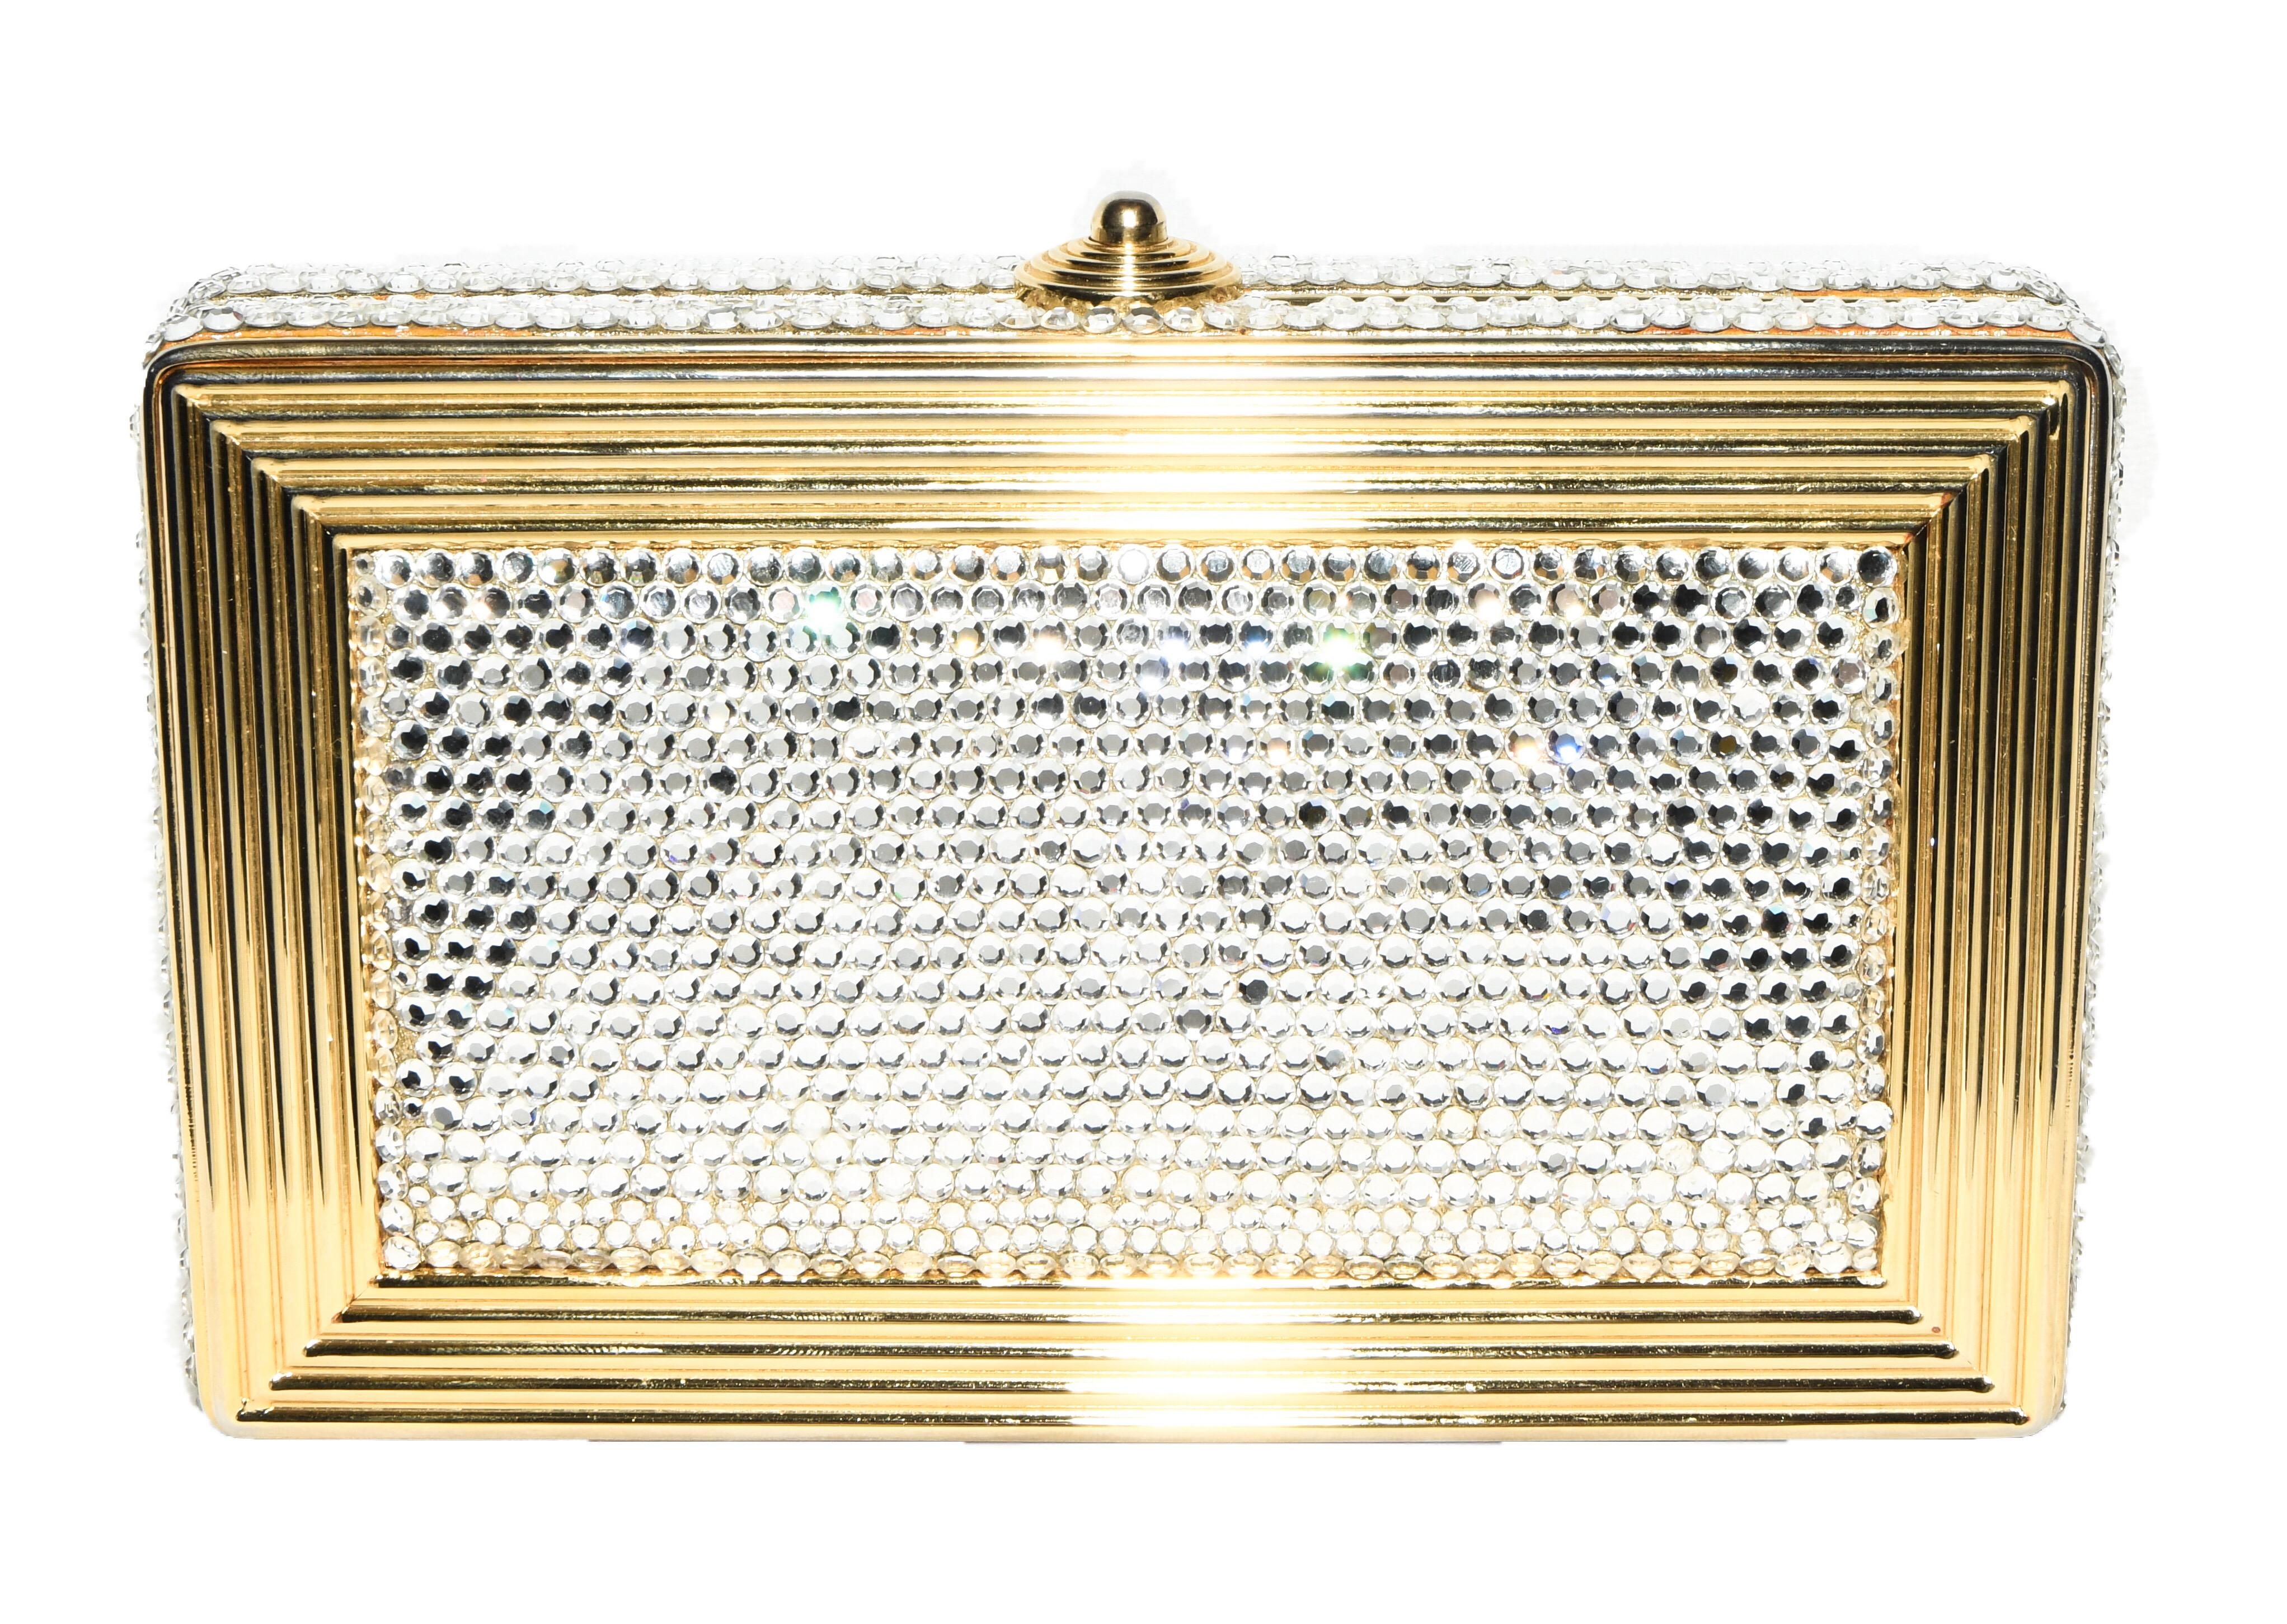 Women's Judith Leiber Gold Tone Metal and Crystal Clutch Bag